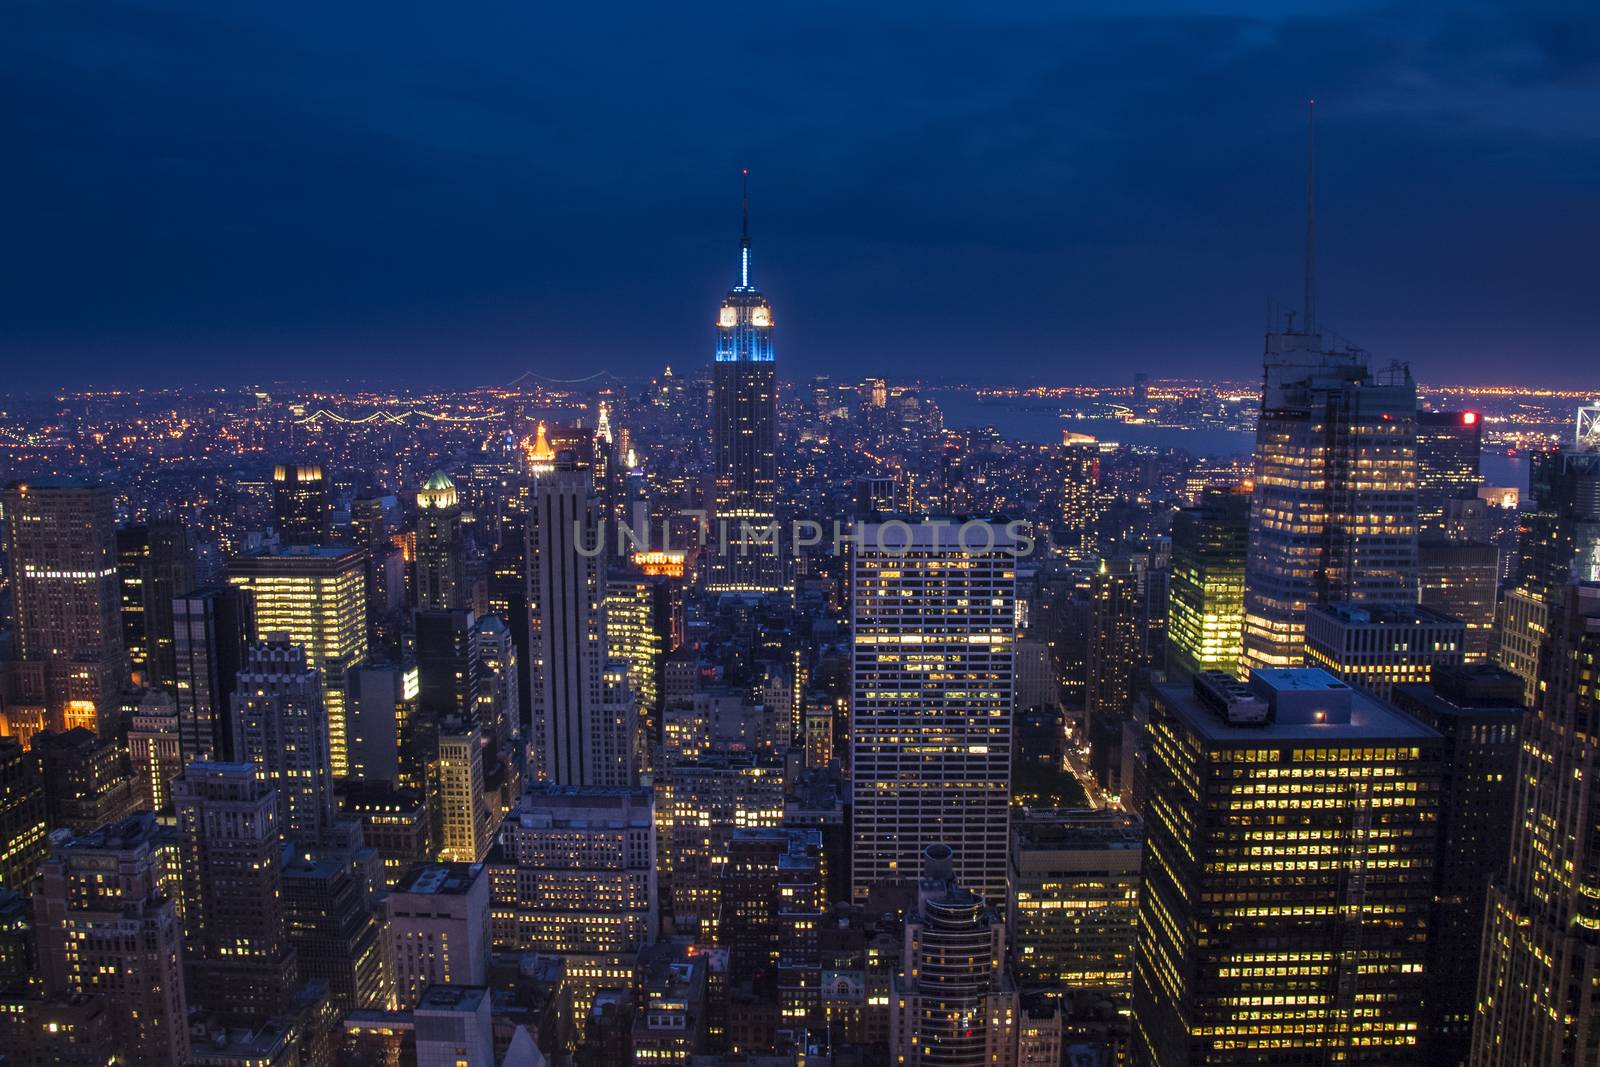 New York City with skyscrapers in the blue hour. The amazing Big Apple in USA.